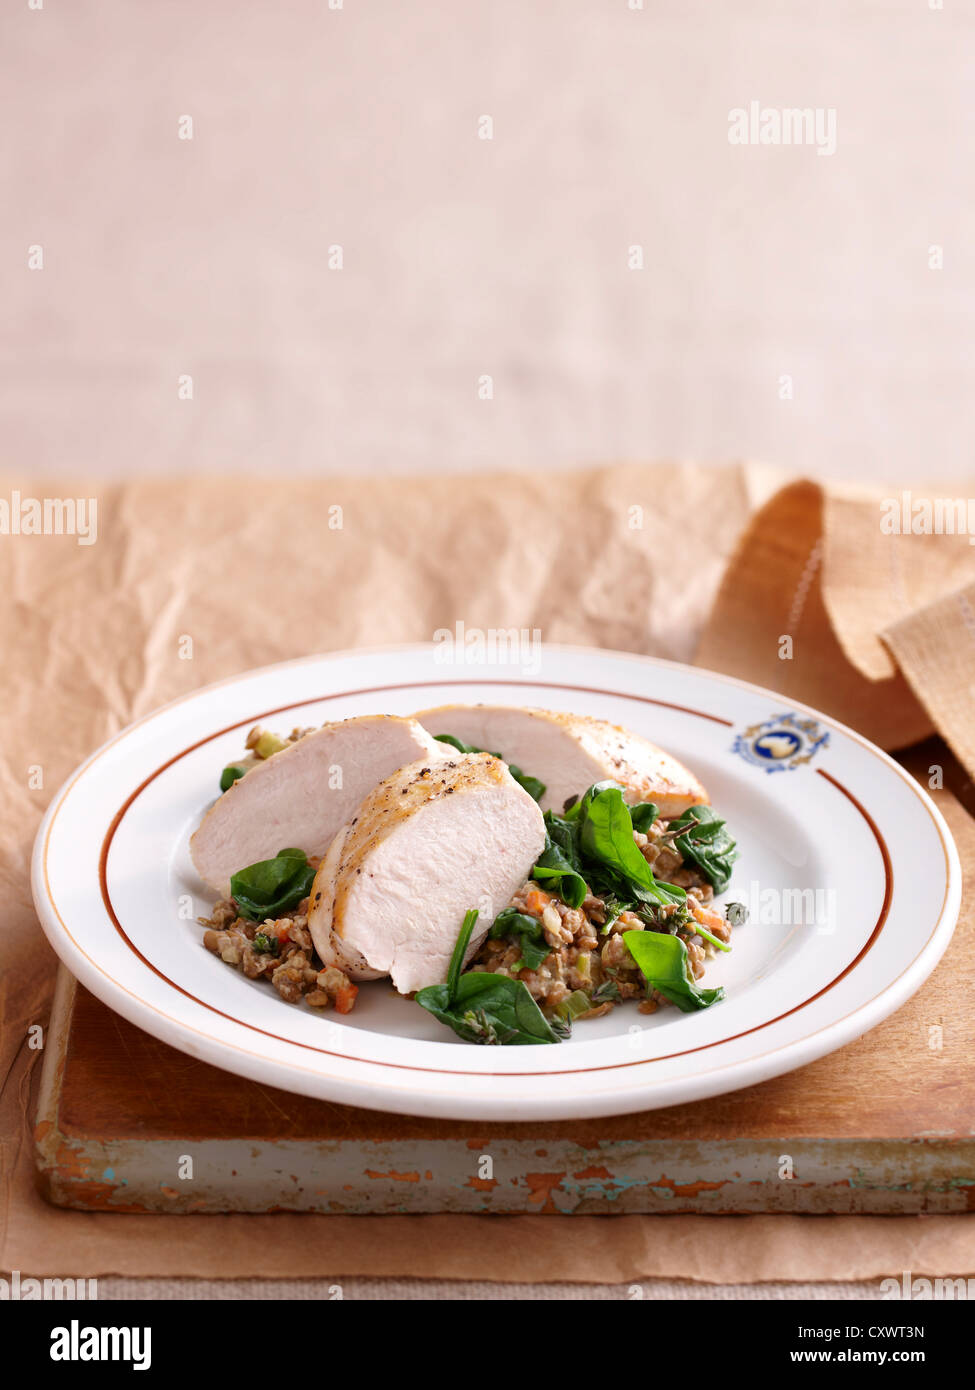 Plate of chicken and lentils Stock Photo